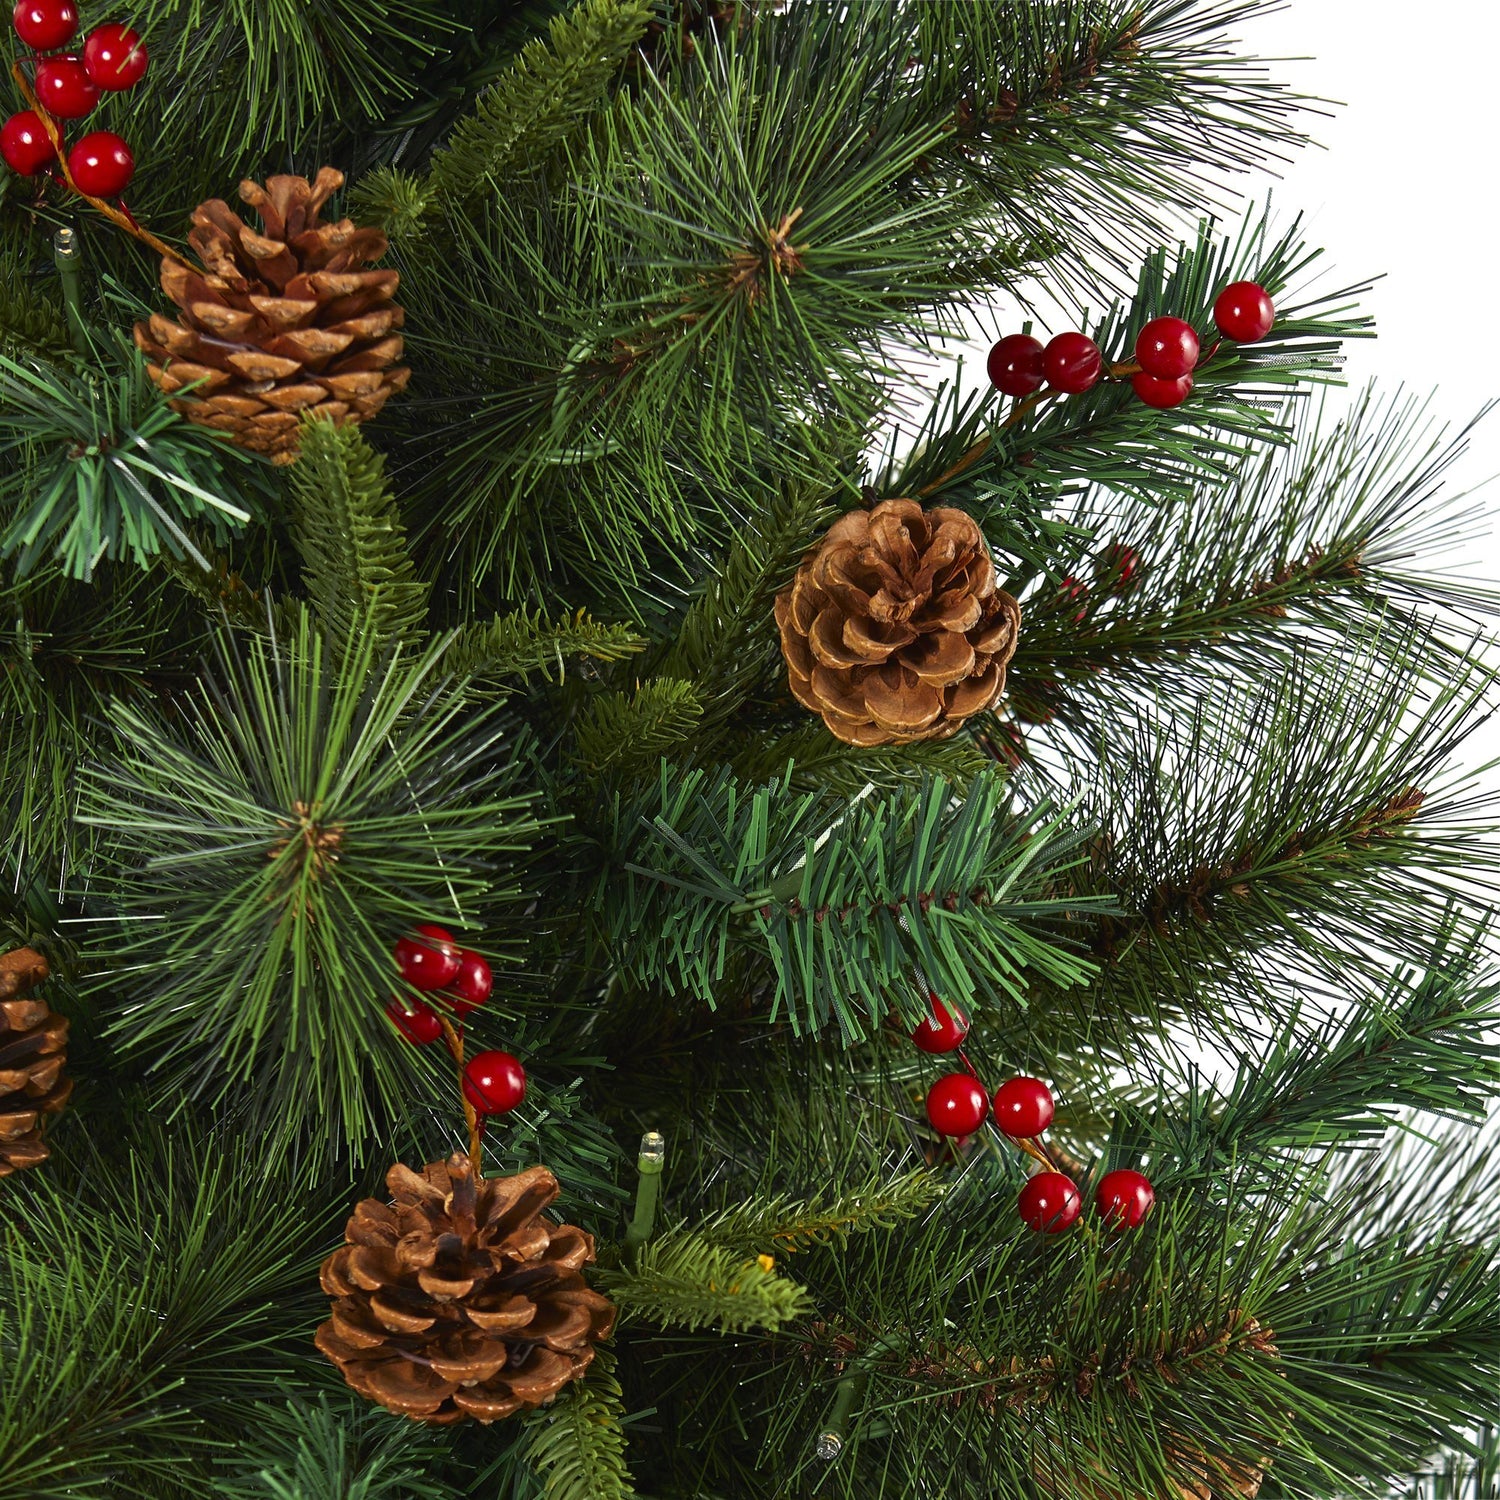 5’ Mixed Pine Artificial Christmas Tree with 150 Clear LED Lights, Pine Cones and Berries